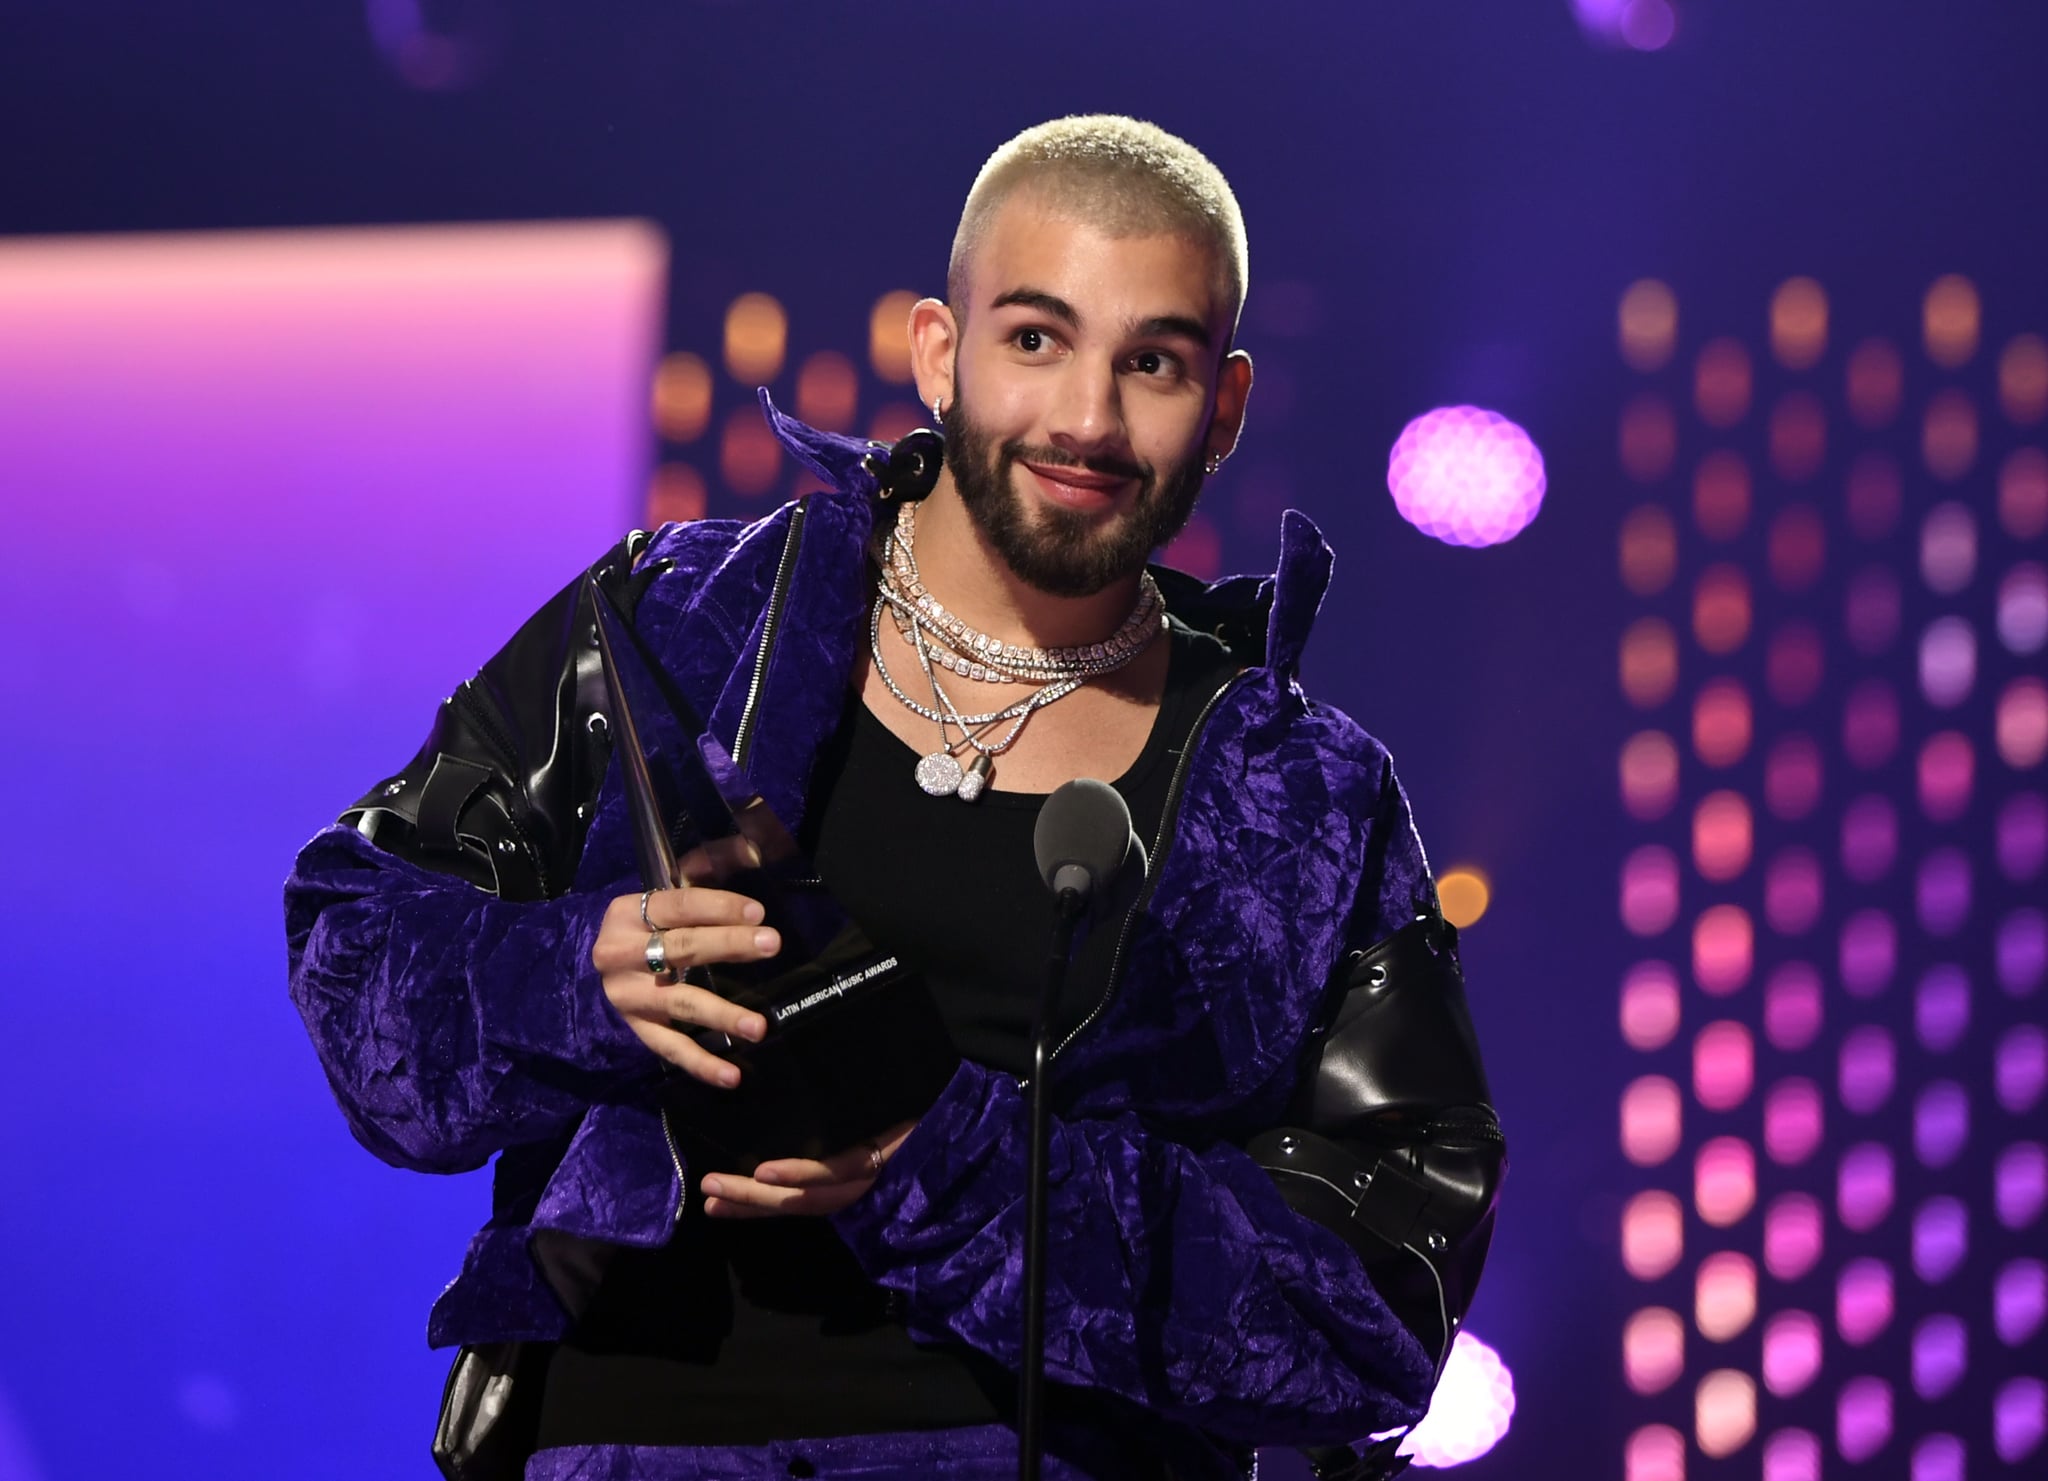 LAS VEGAS, NEVADA - APRIL 20: Manuel Turizo accepts the Favorite Tropical Song award onstage during the 2023 Latin American Music Awards at MGM Grand Garden Arena on April 20, 2023 in Las Vegas, Nevada. (Photo by Mindy Small/Getty Images)